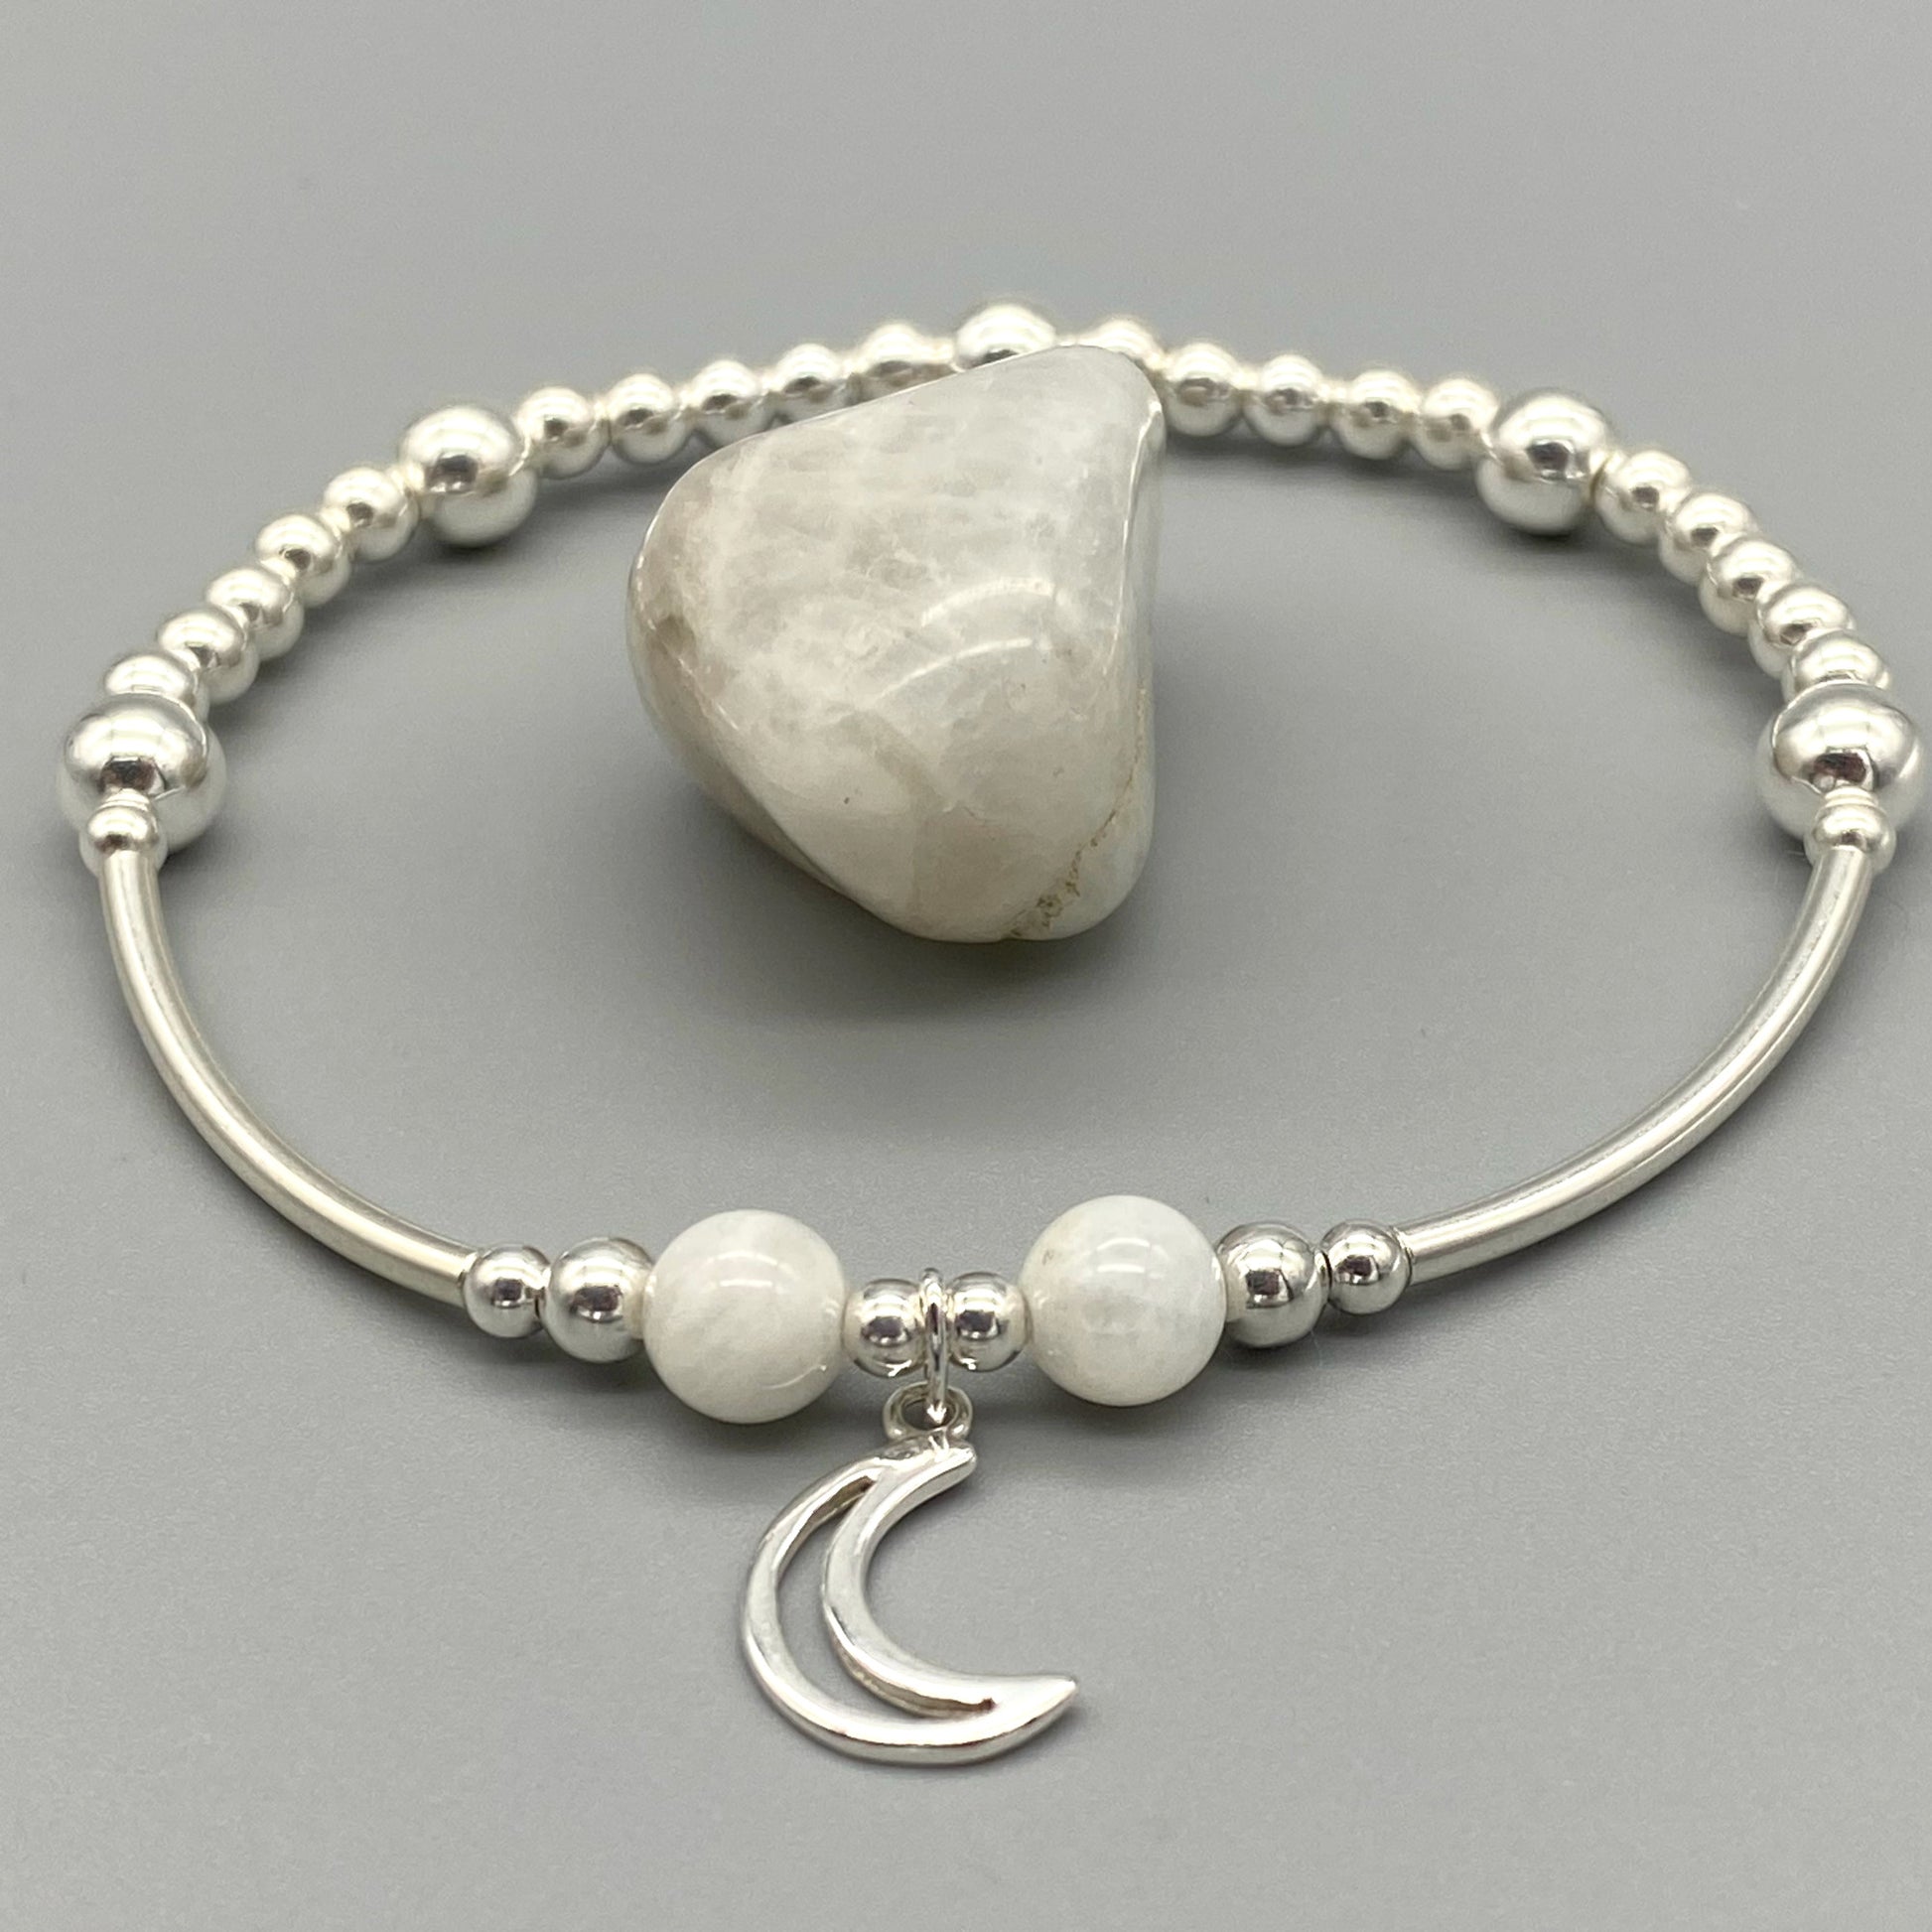 Crescent Moon charm Moonstone healing crystal & sterling silver stack bracelet by My Silver Wish